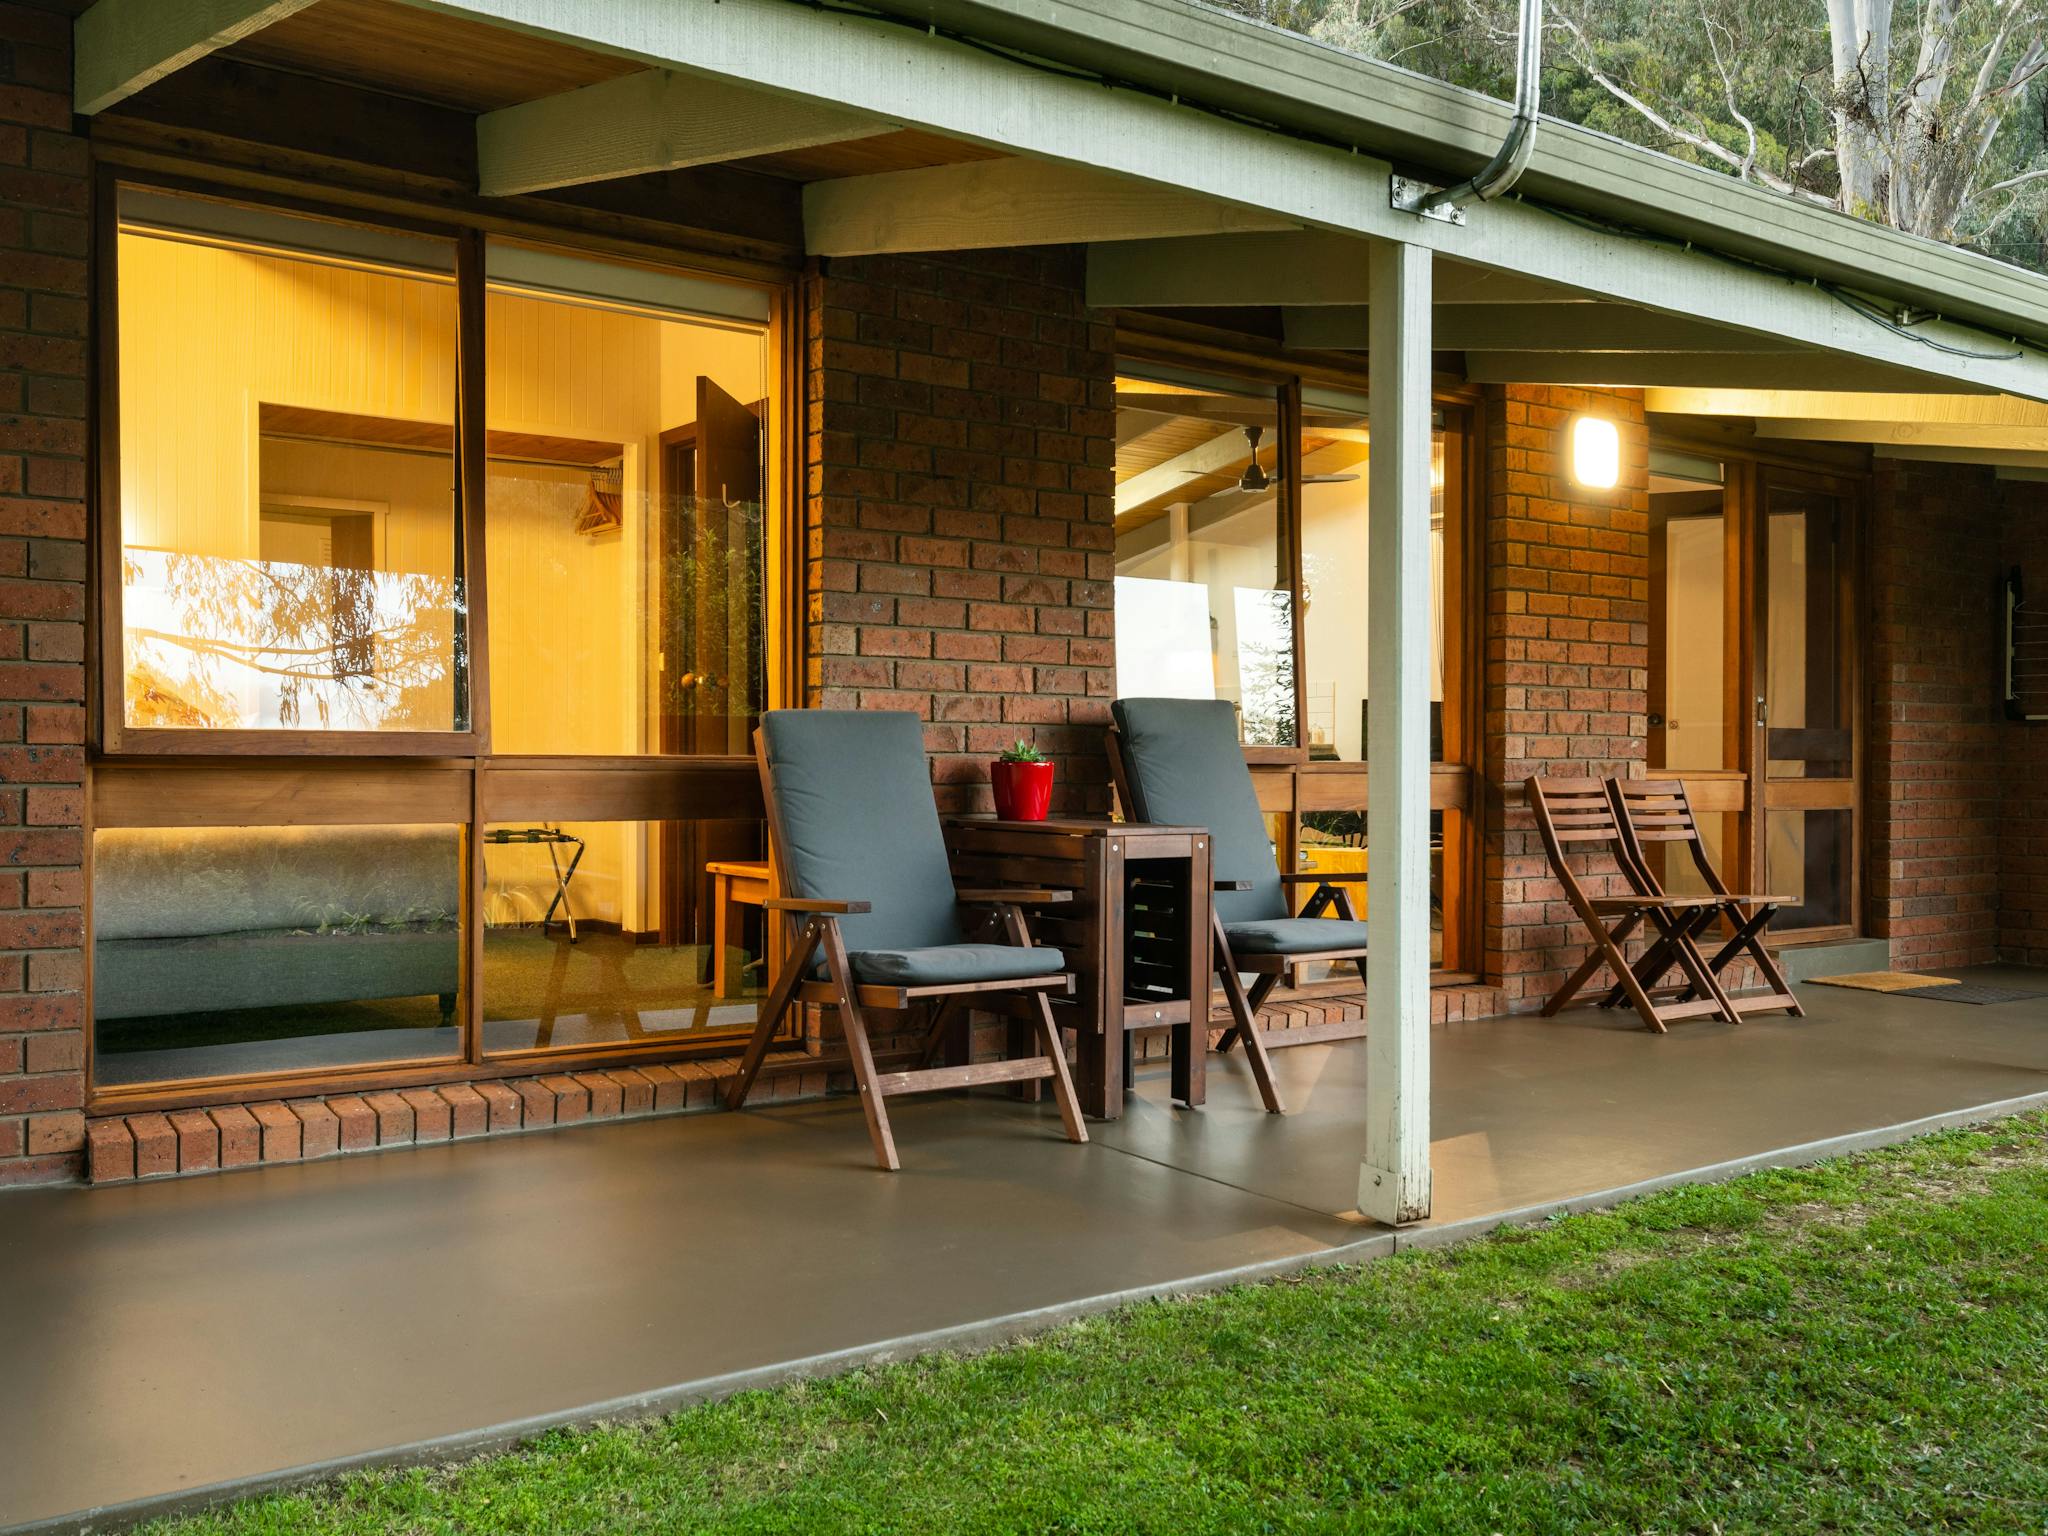 Private verandah with comfortable outdoor seating